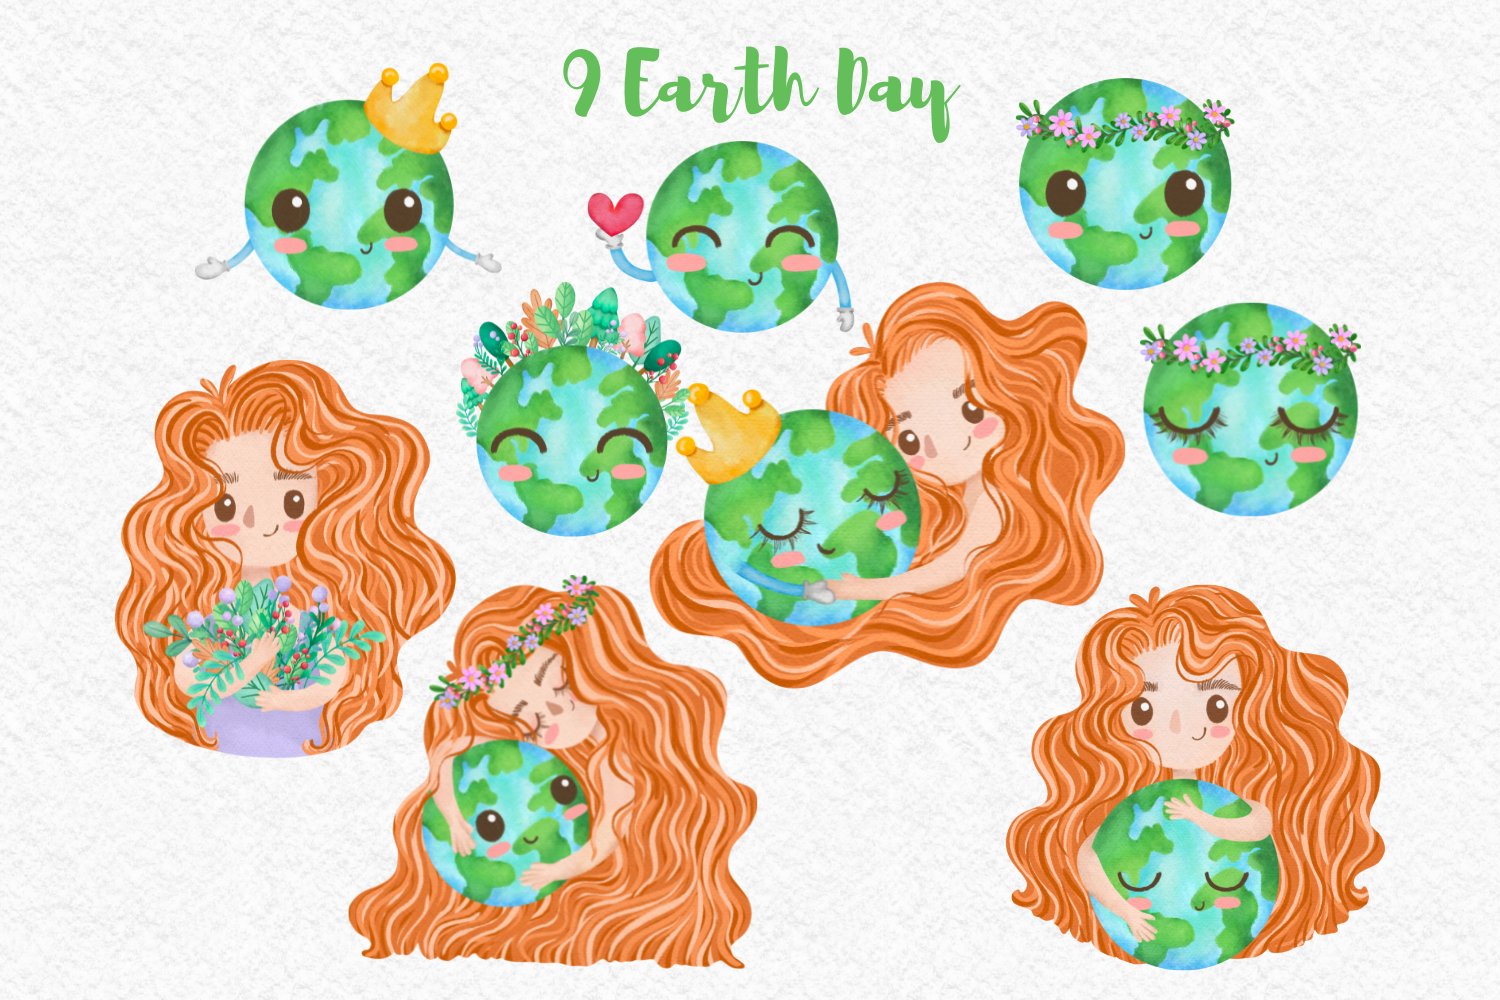 Illustrations for Earth Day.